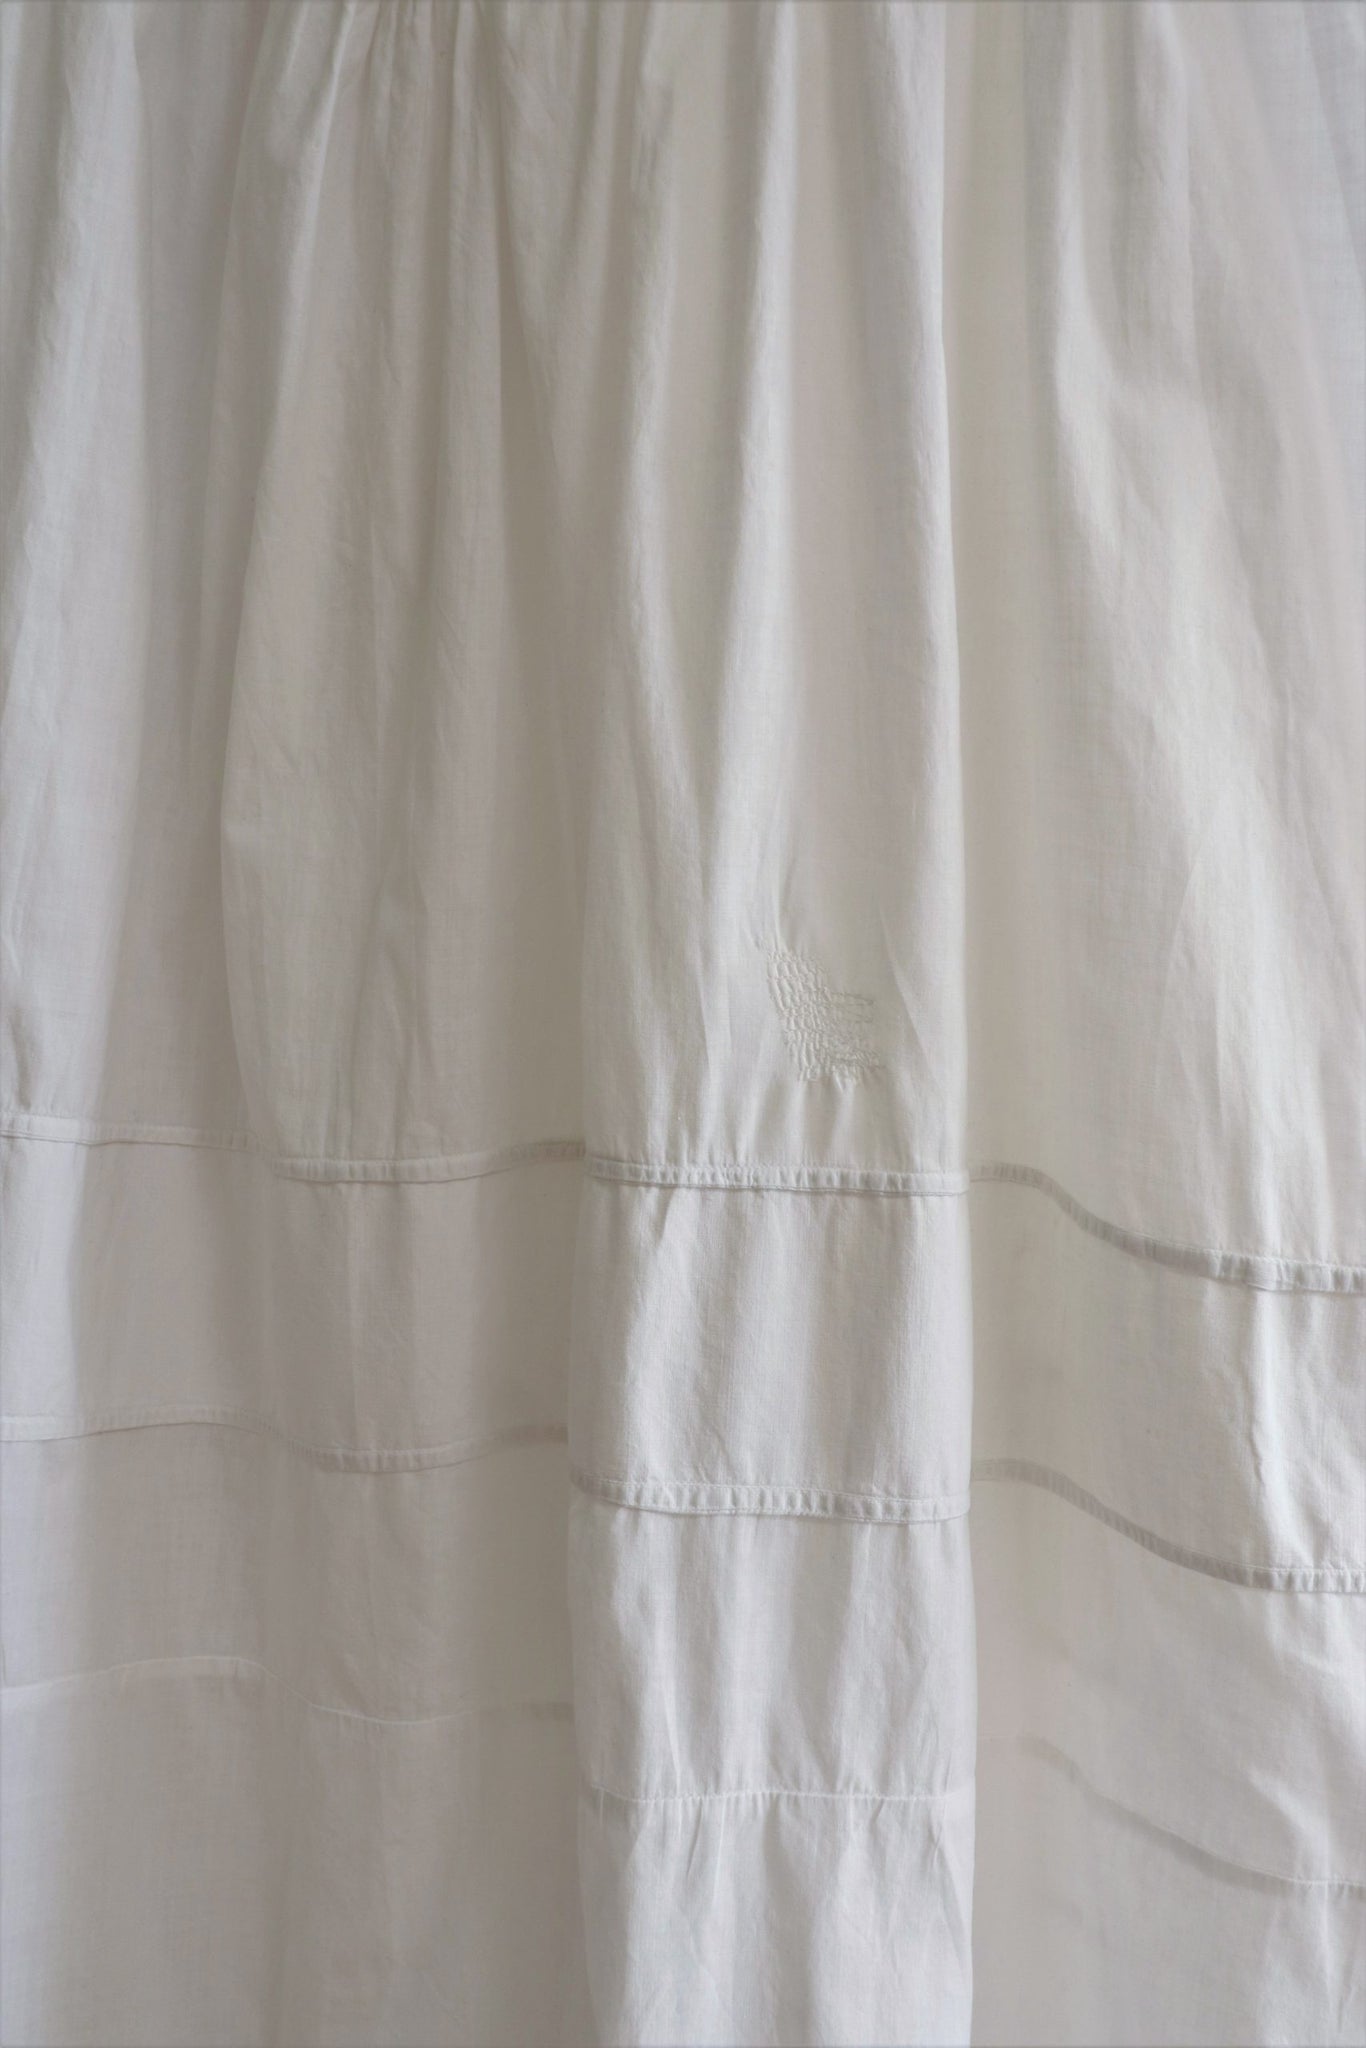 19th Antique French White Cotton Tiered Skirt